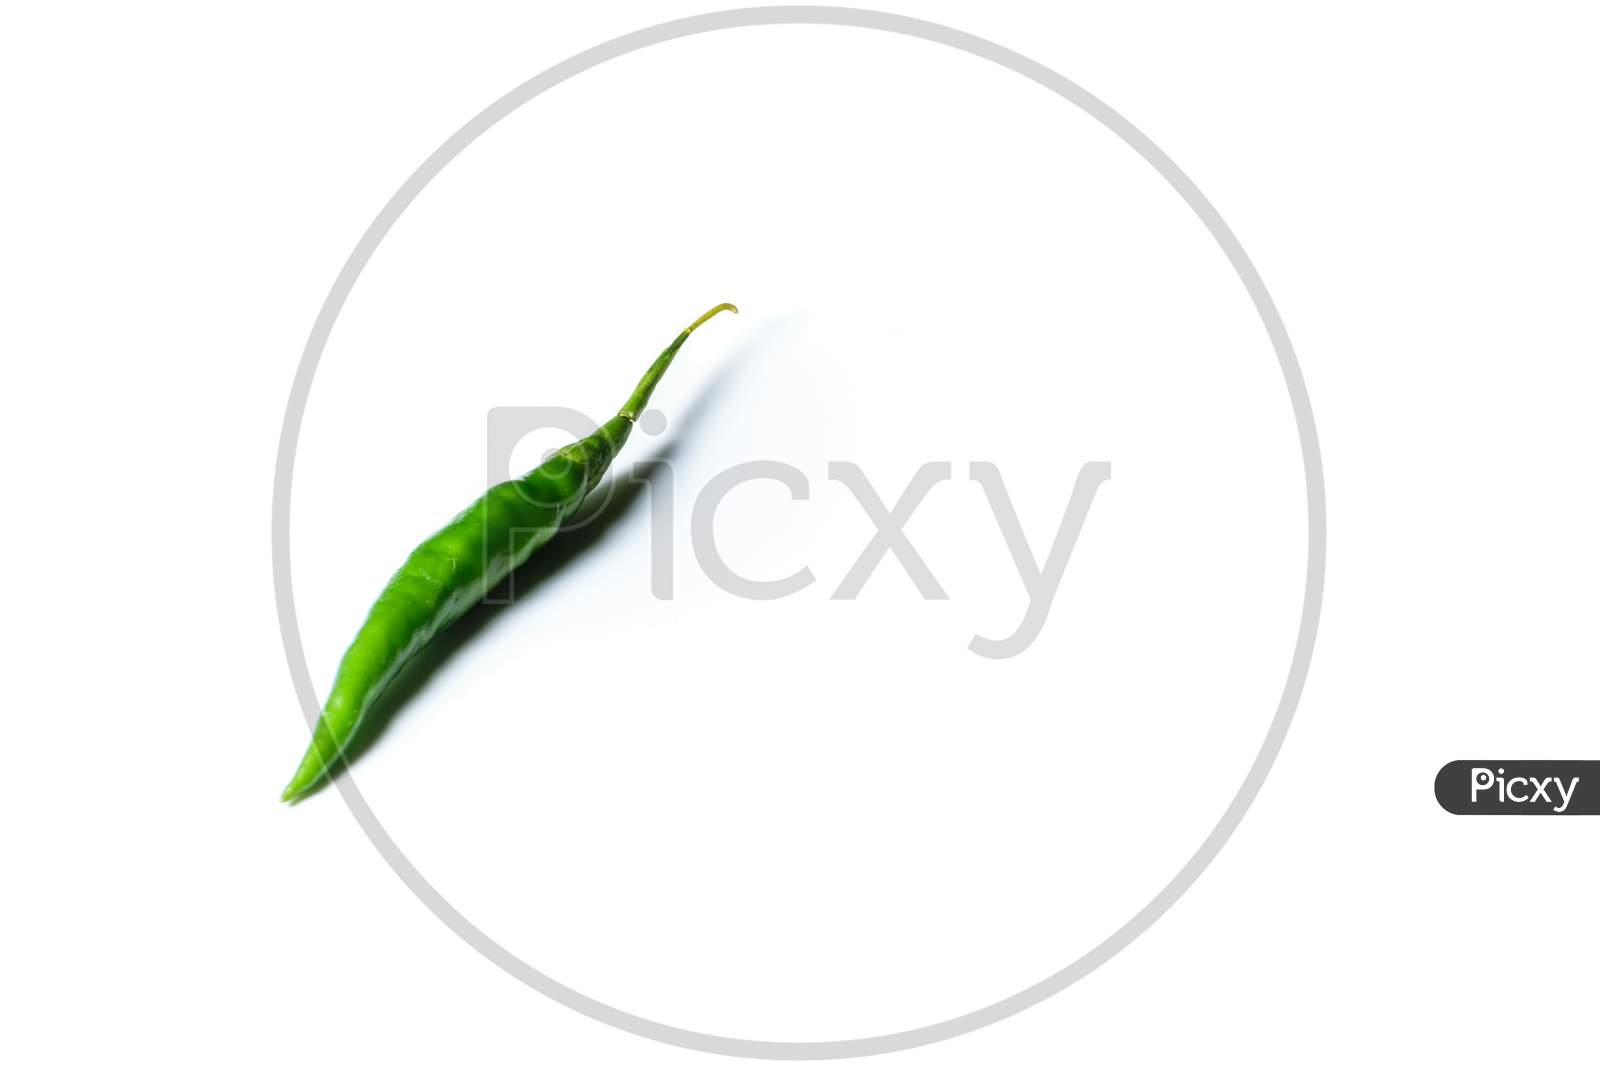 Isolated green chili placed in a white background with space for text in the right